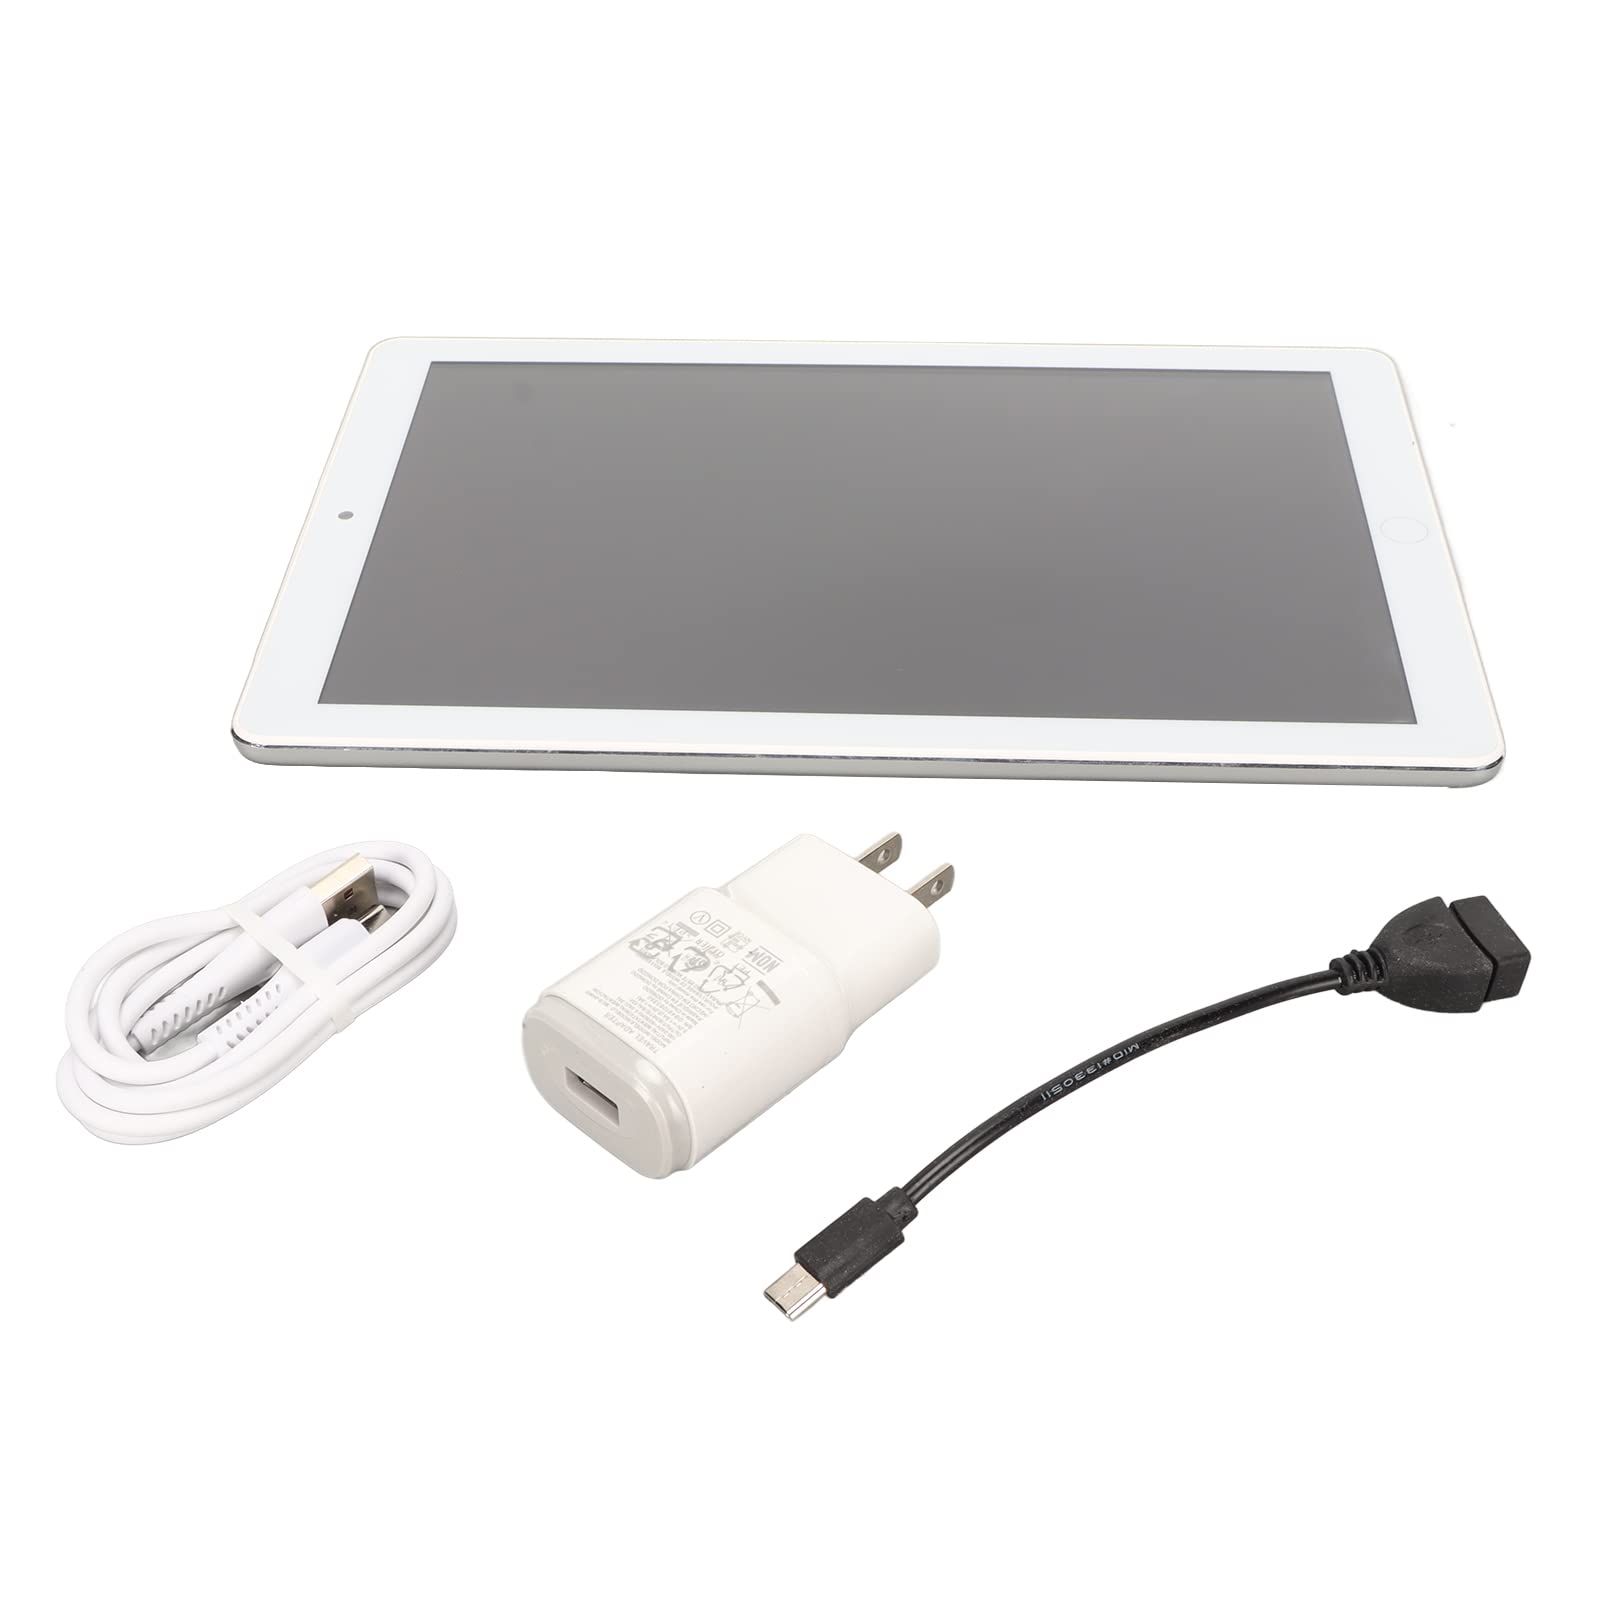 Kufoo Portable Tablet, Silvery 100 to 240V Octa Cores Tablet 1960x1080 for Children for Office (US Plug)